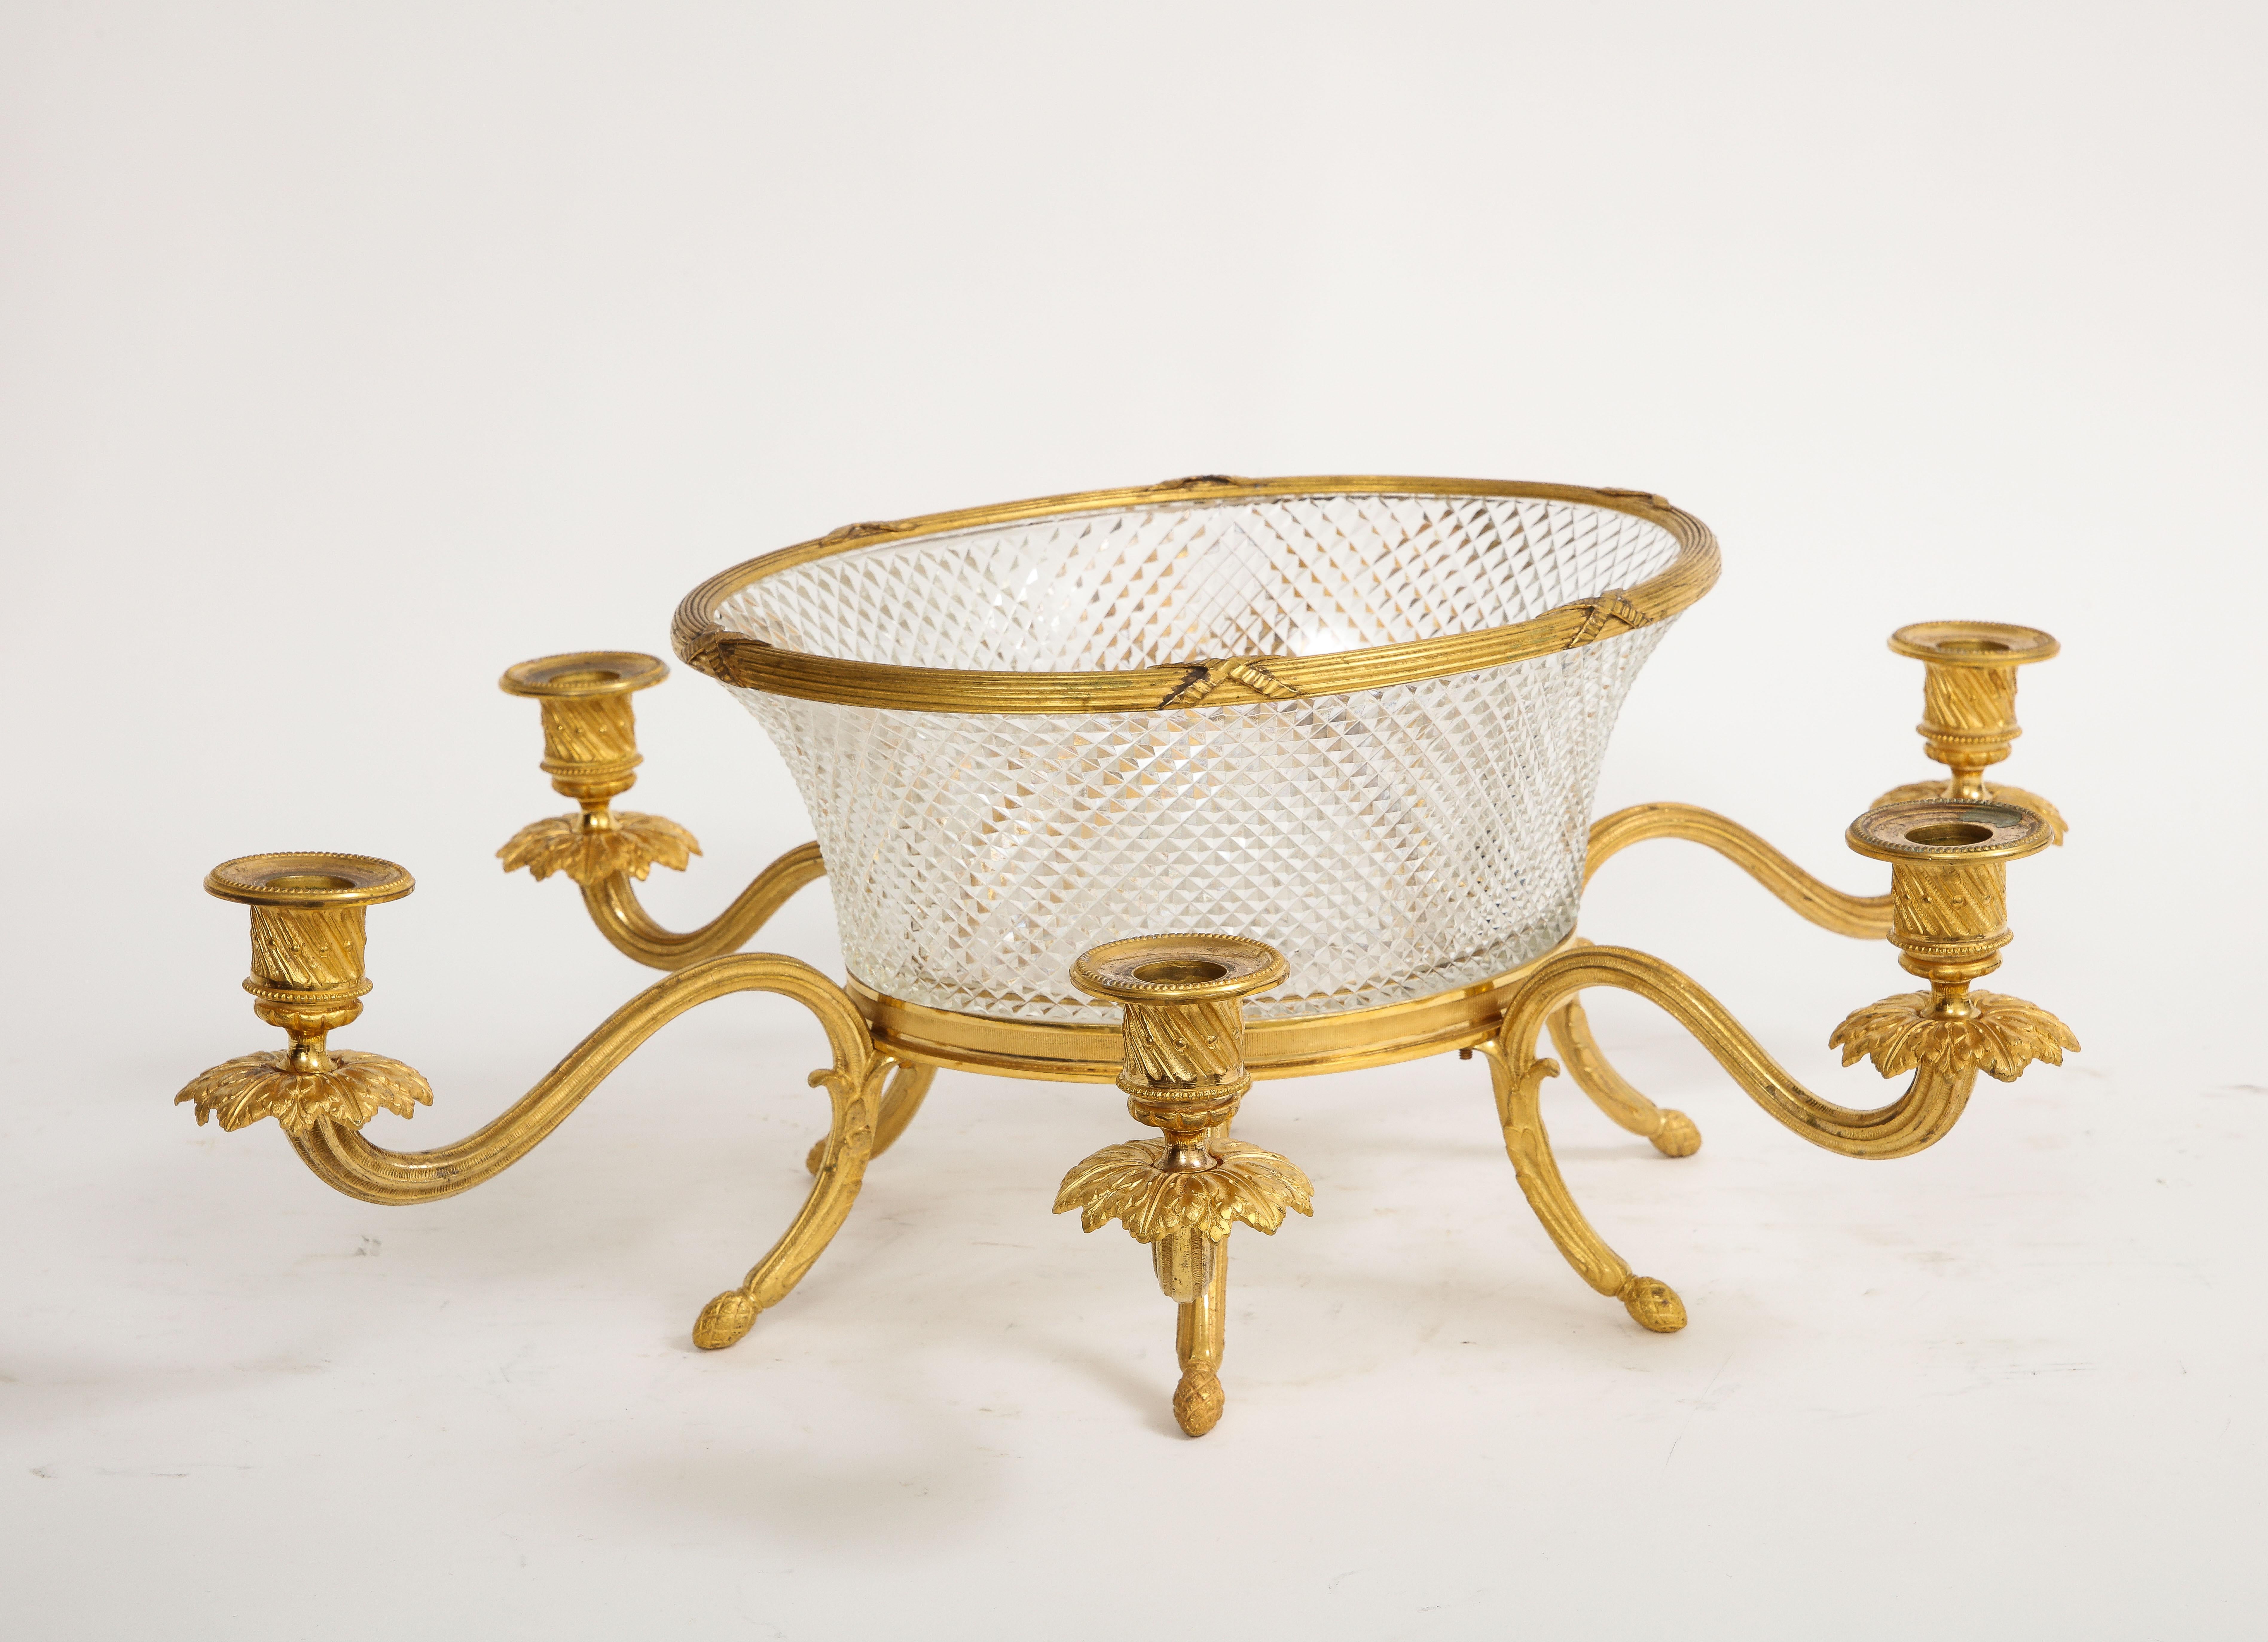 Late 19th Century Unusual 19th Century French Ormolu Mounted Crystal Centerpiece or Candelabra For Sale